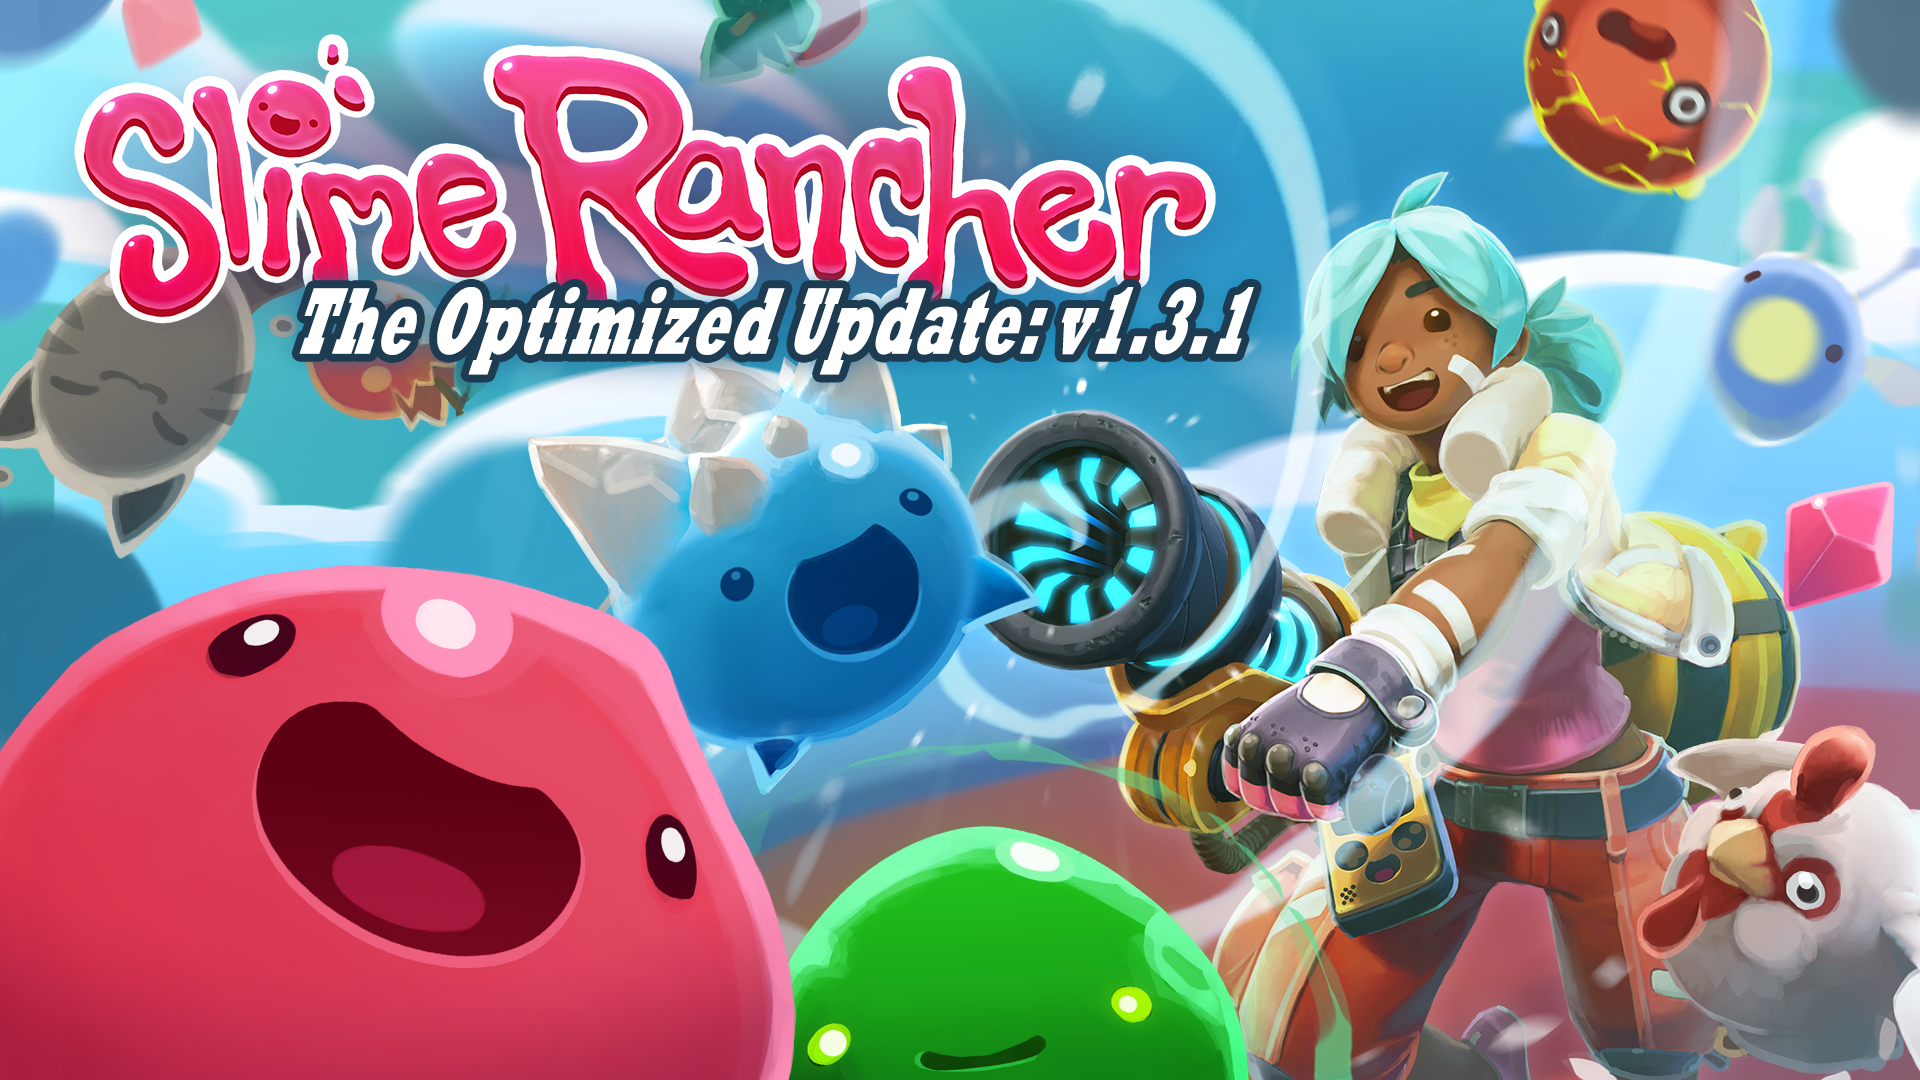 how to read the slime rancher game save